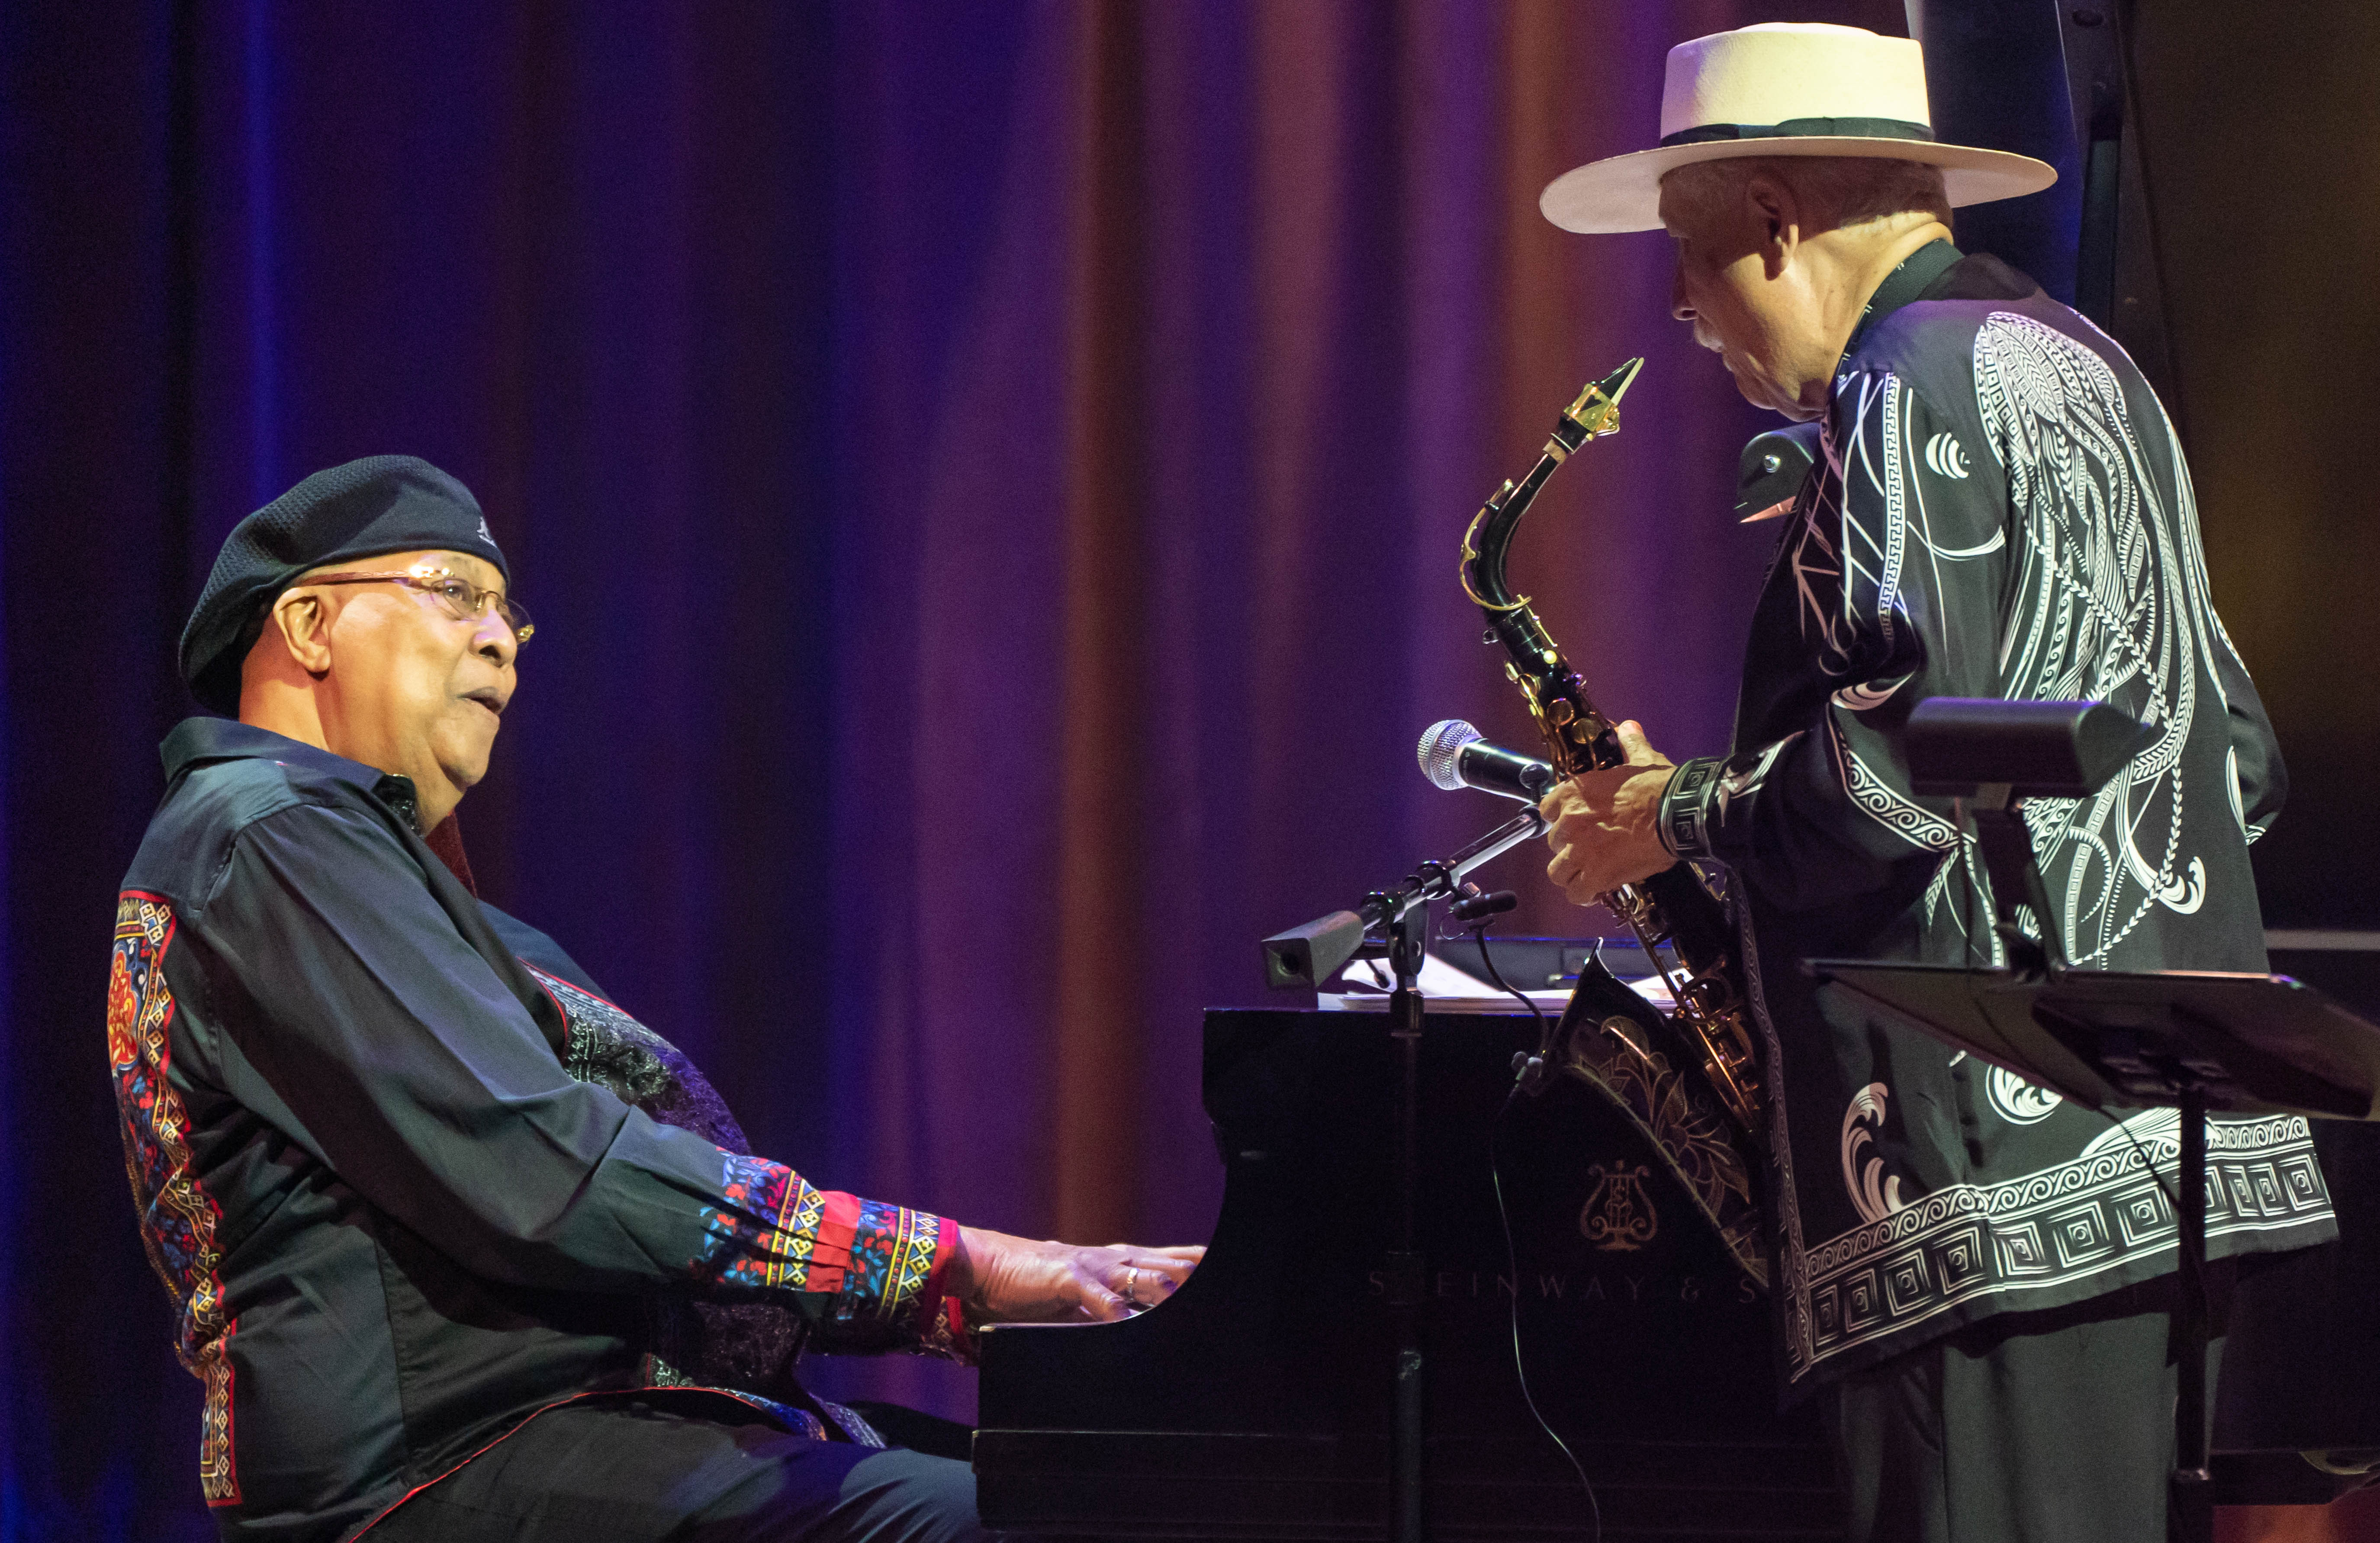 Chucho Valdés and Paquito D'Rivera onstage at the Knight Concert Hall in 2022. Photo by Daniel Azoulay.